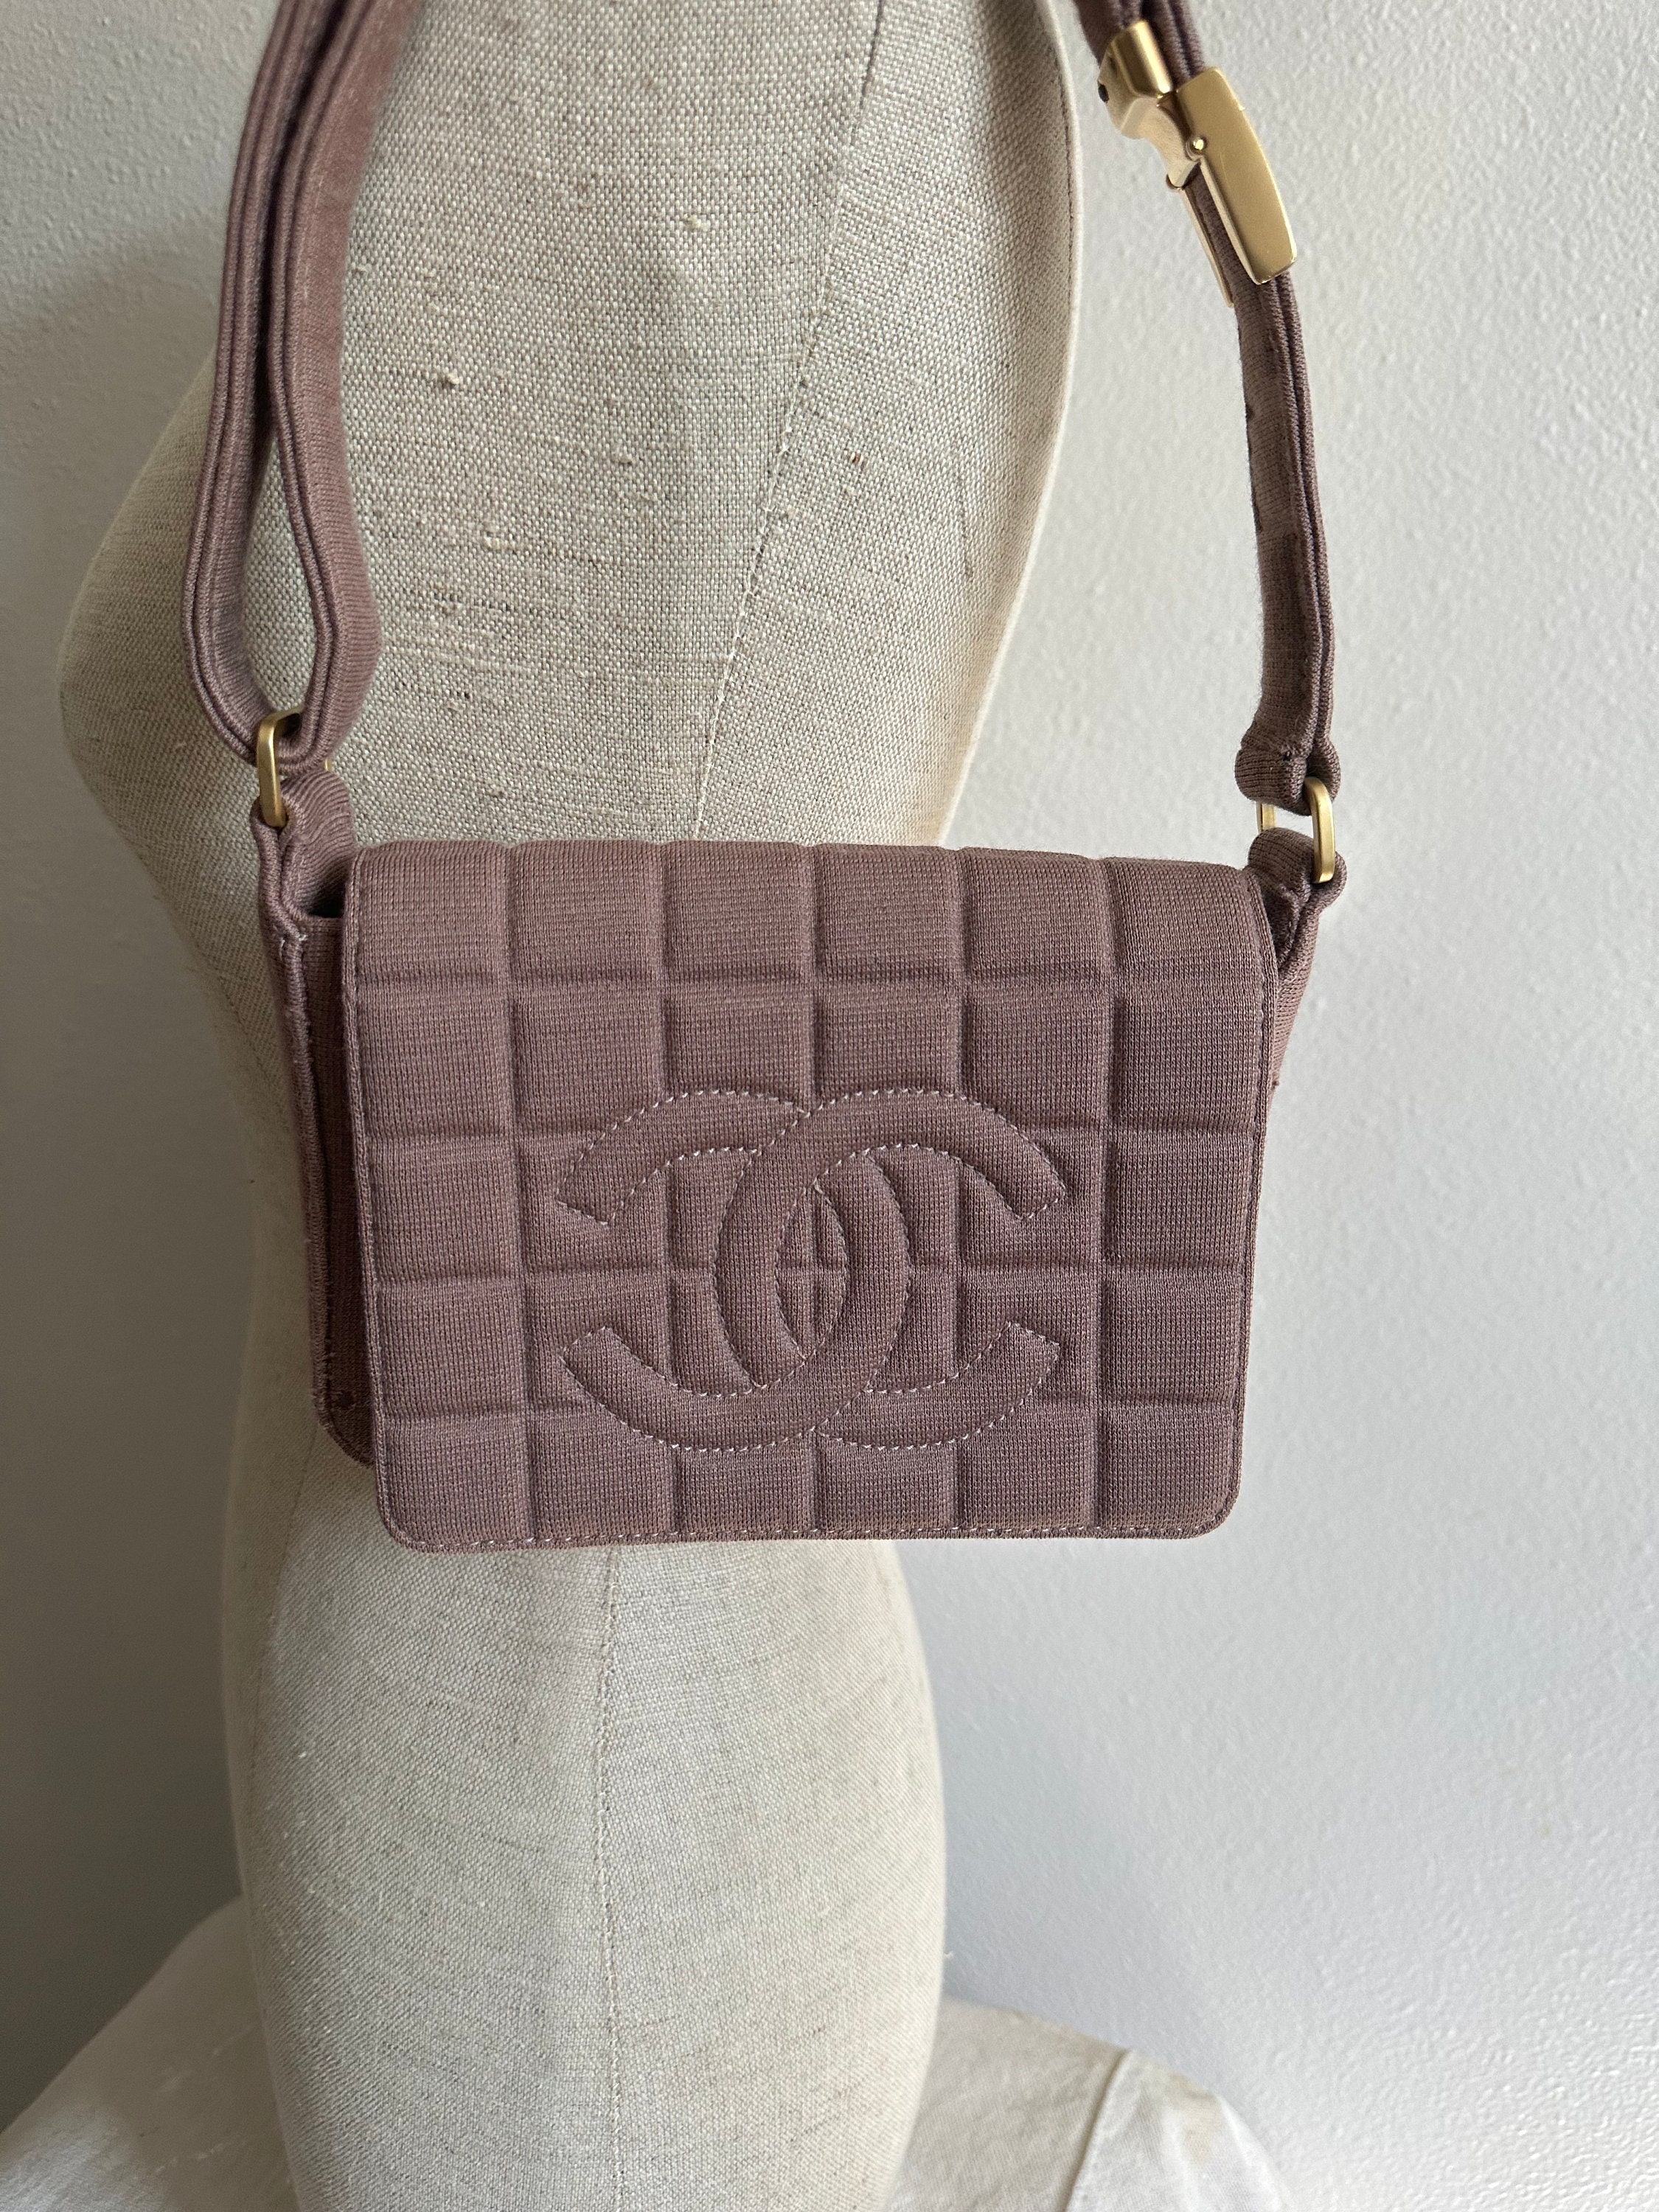 Vintage CHANEL Quilted Jersey Chocolate Bar Bag / Double CC 